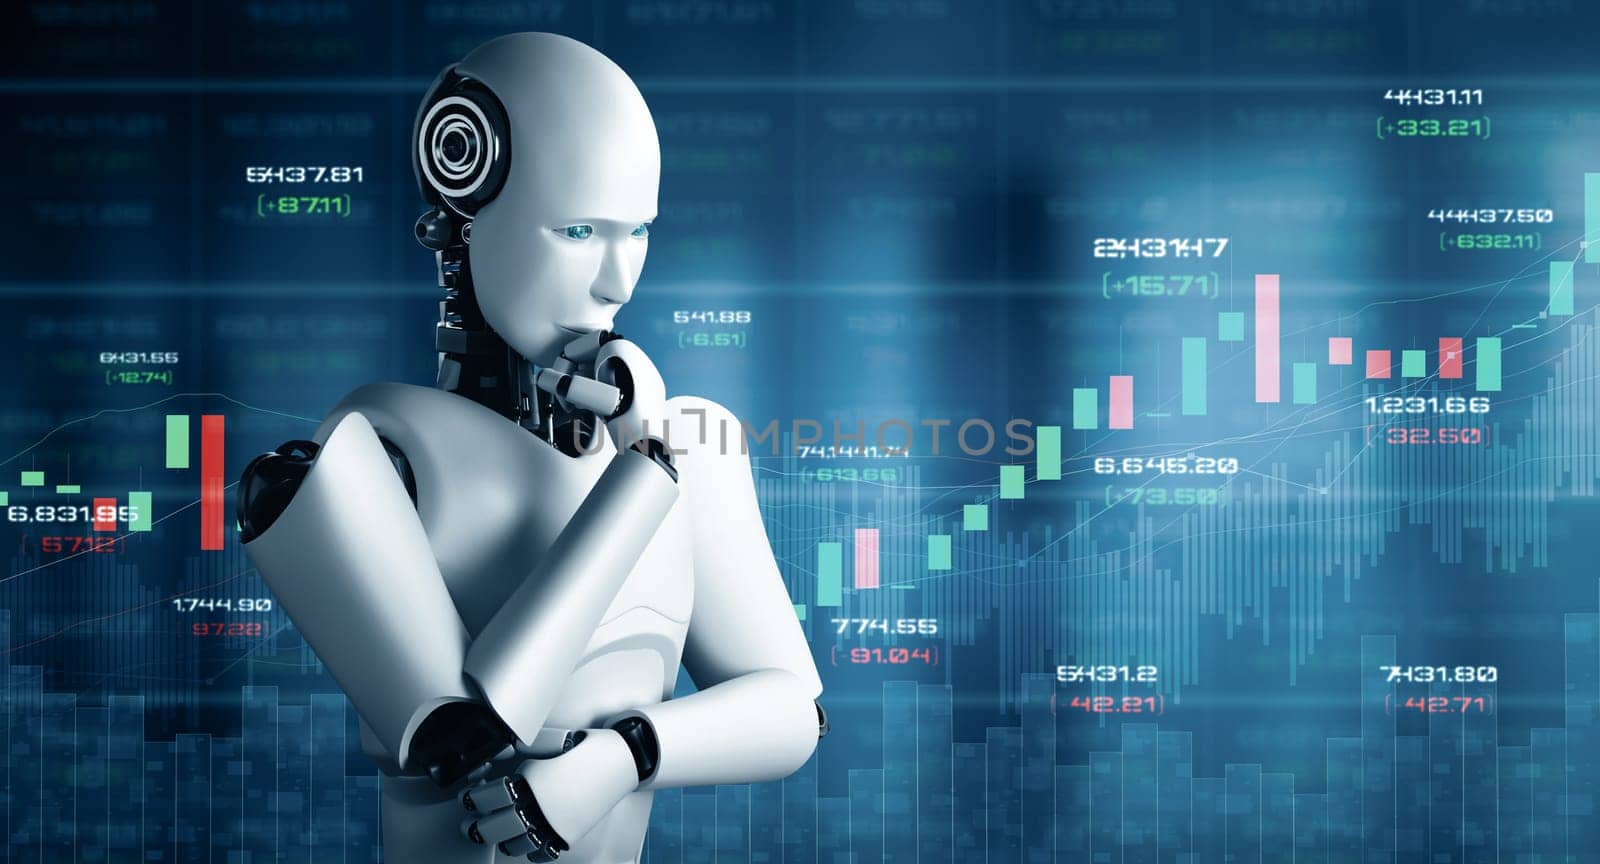 XAI 3d illustration Future financial technology controlled by AI robot using machine learning and artificial intelligence to analyze business data and give advice on investment and trading decision. 3D illustration.